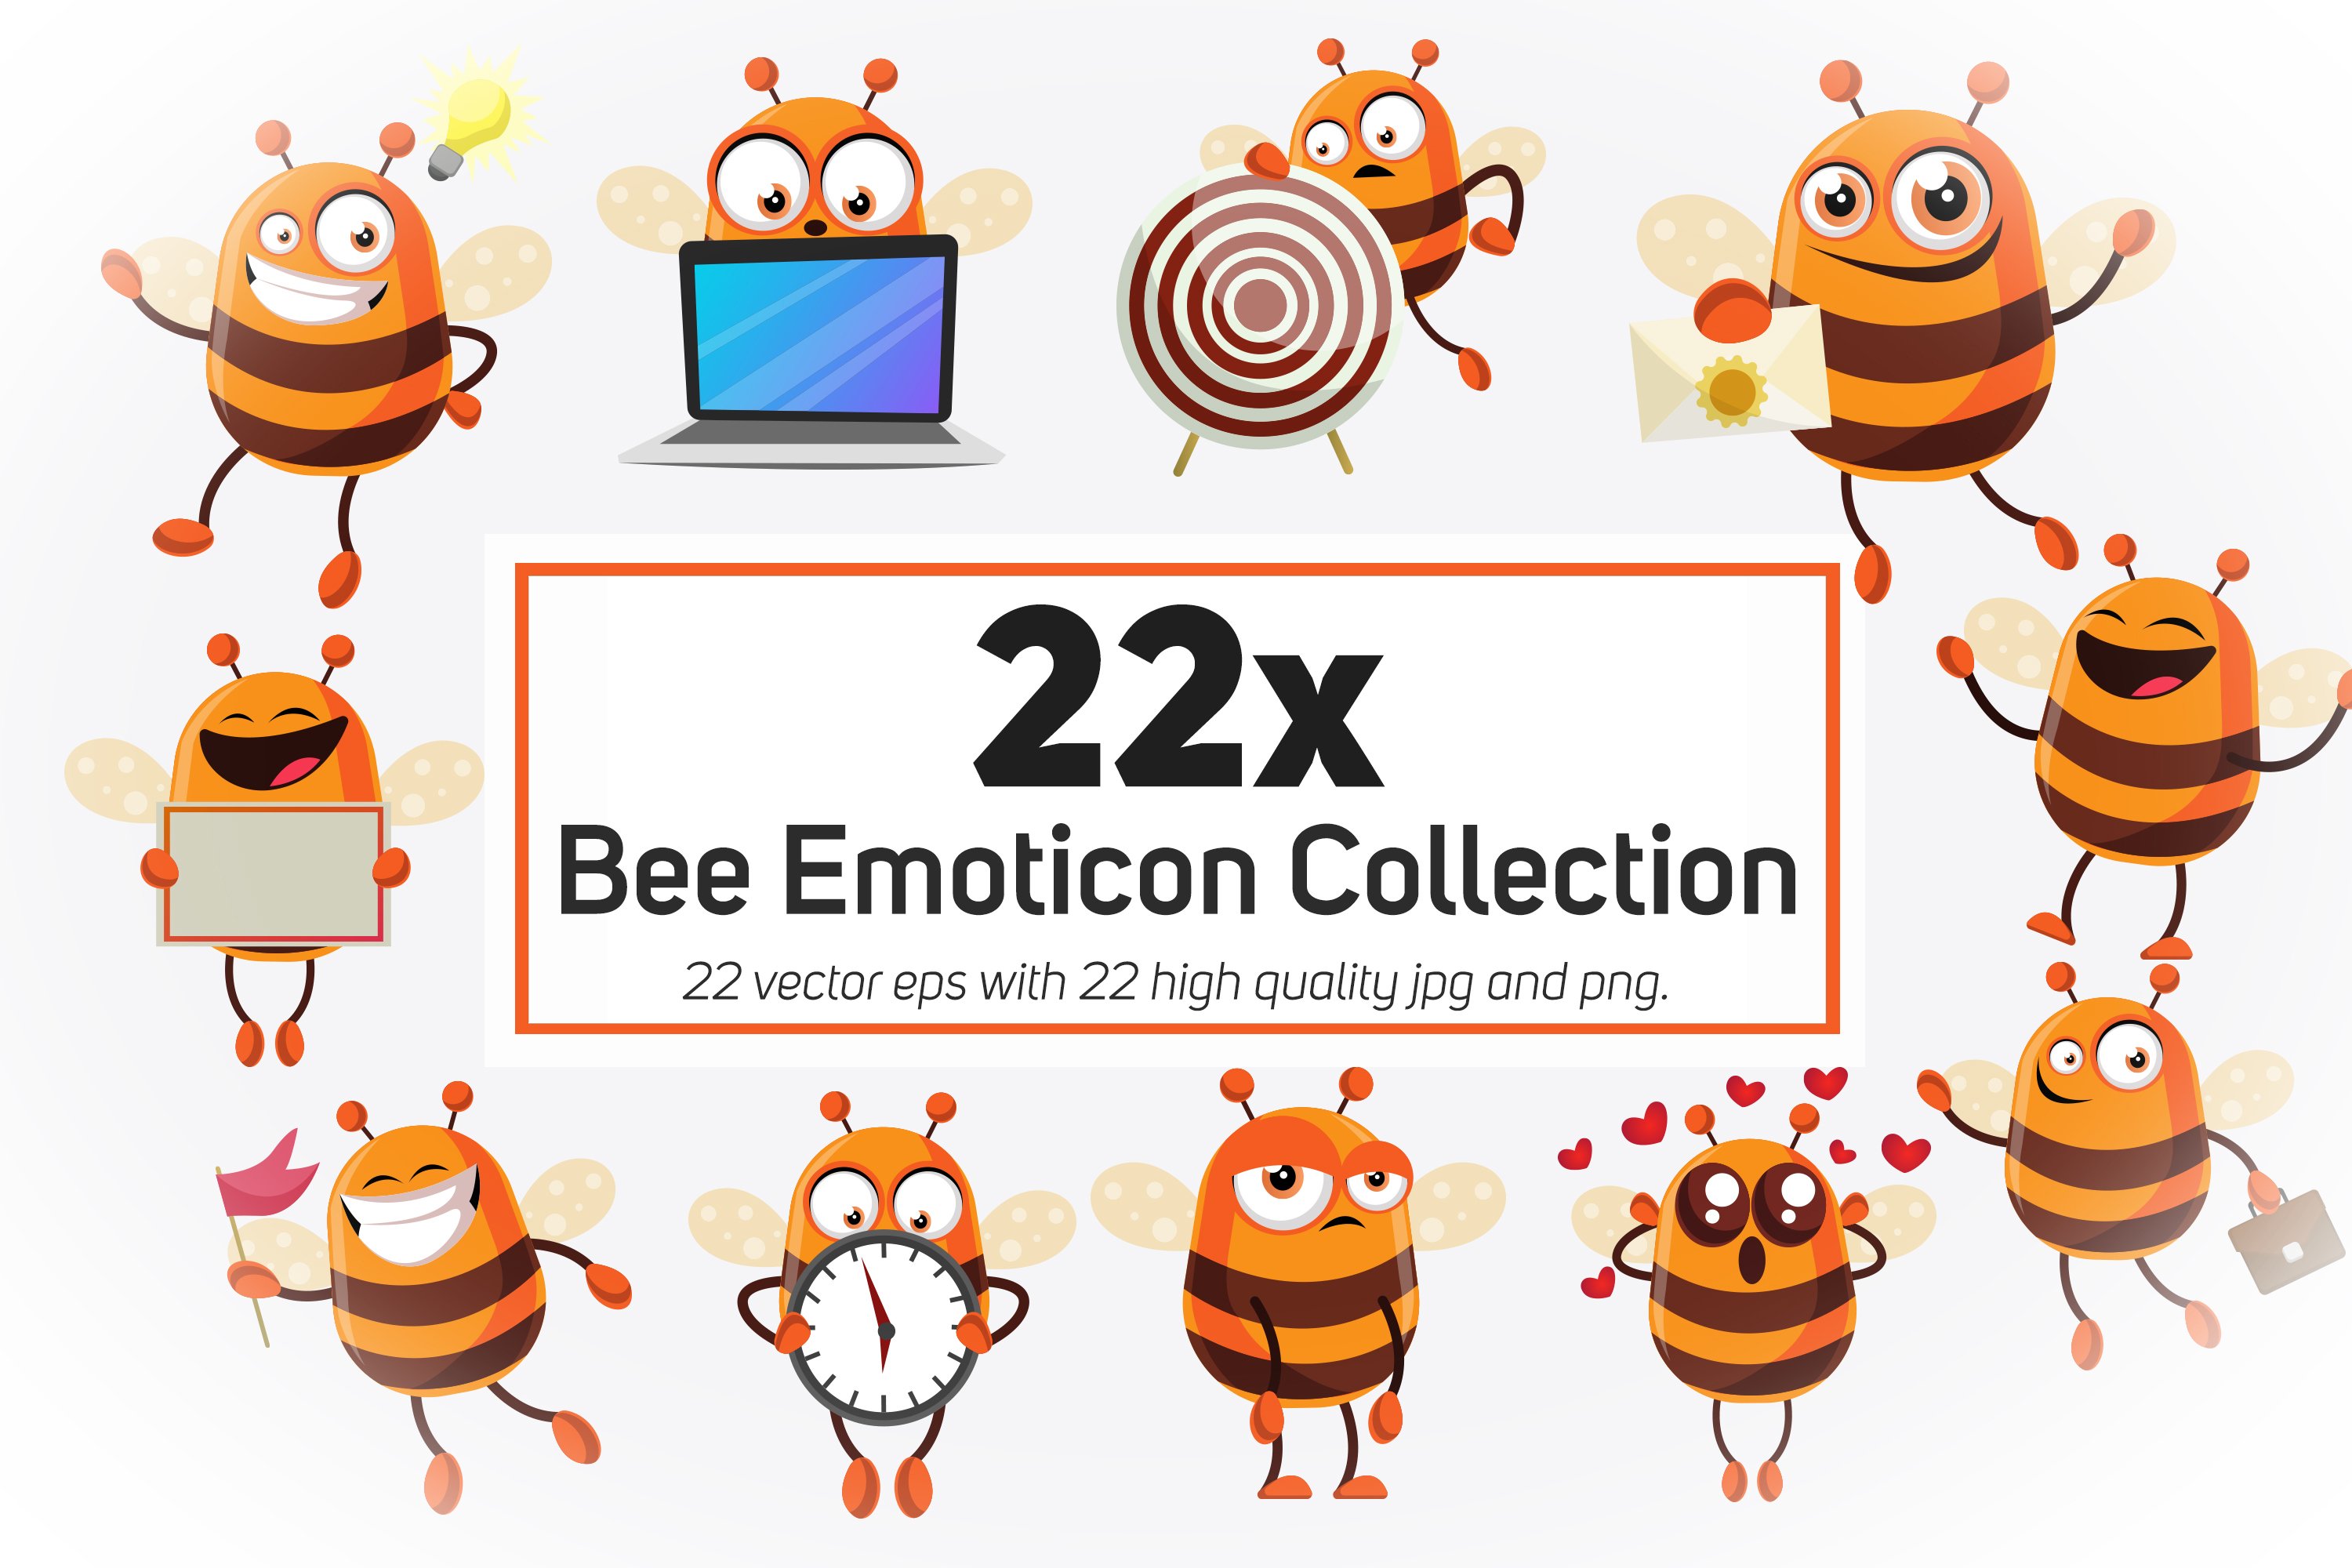 Set of amazing images of bee emoticons.